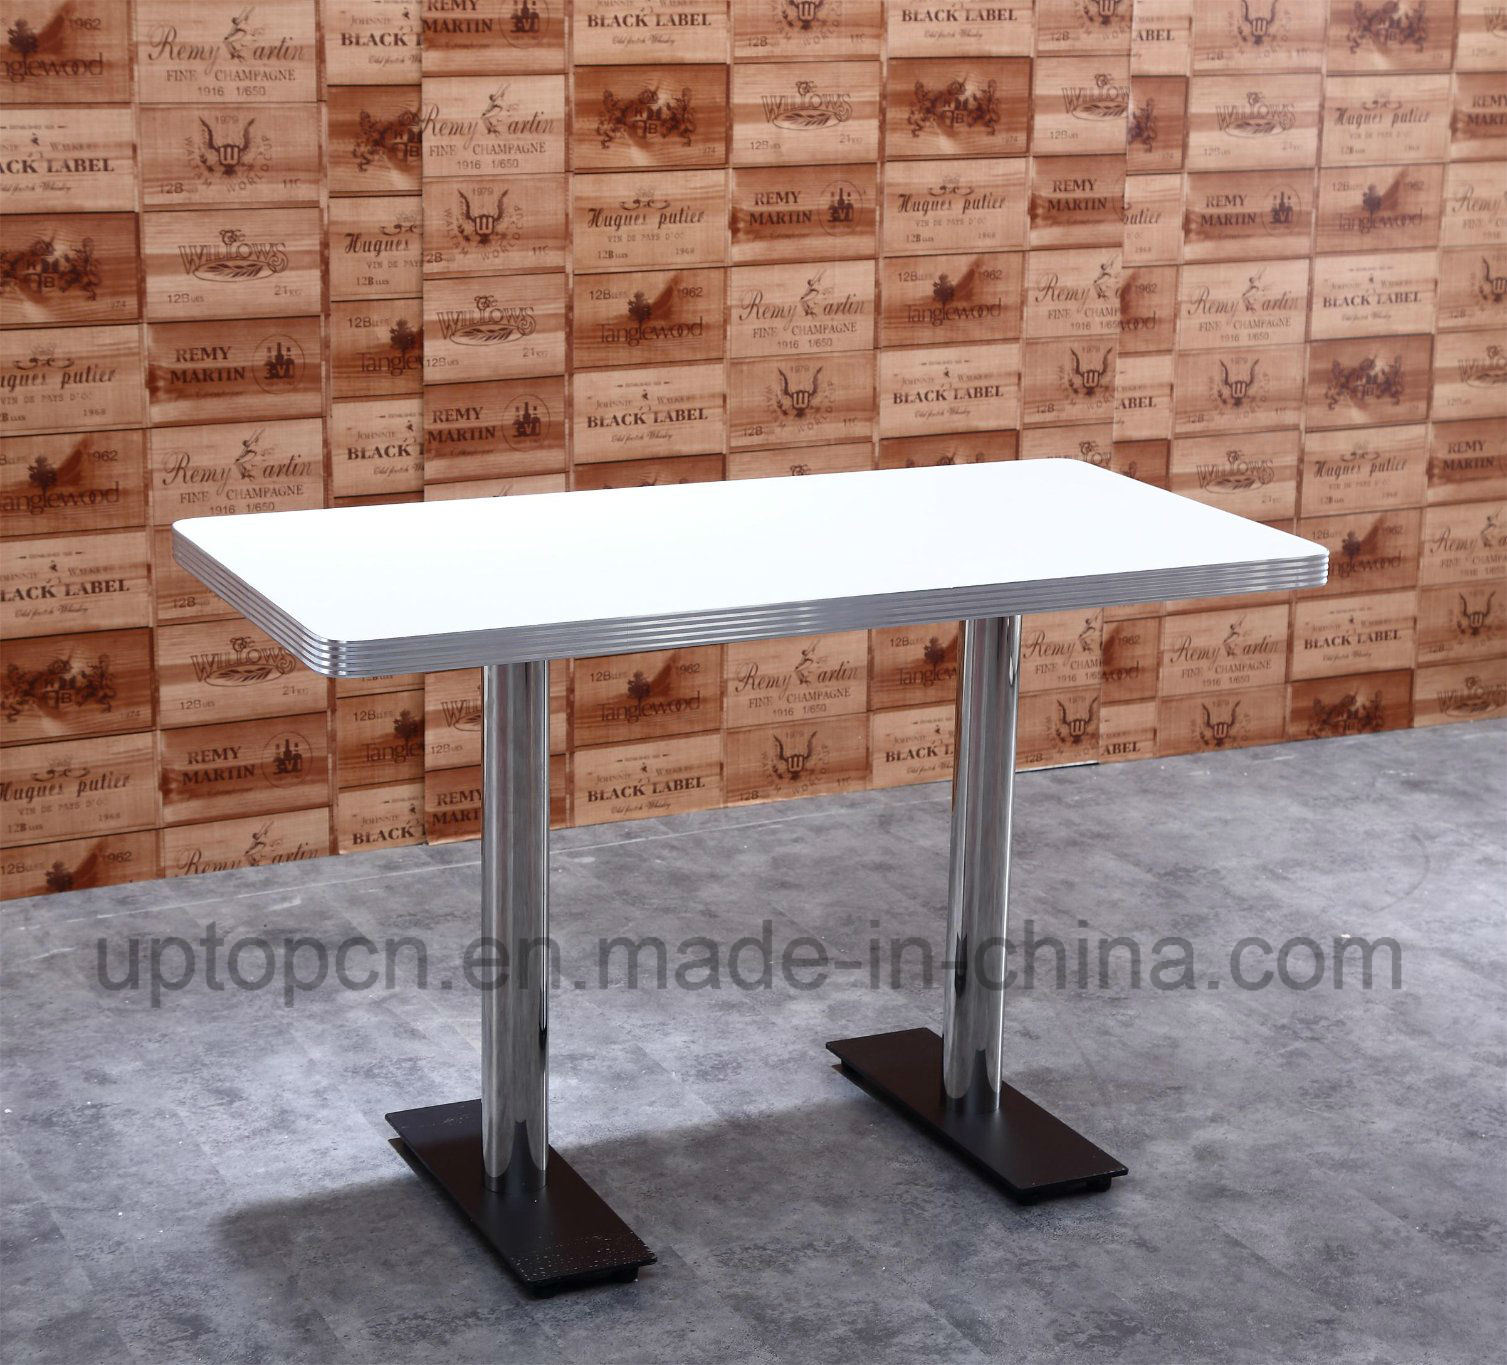 Durable Plywood Rectangle Restaurant Table with HPL for Dining Room (SP-RT497)